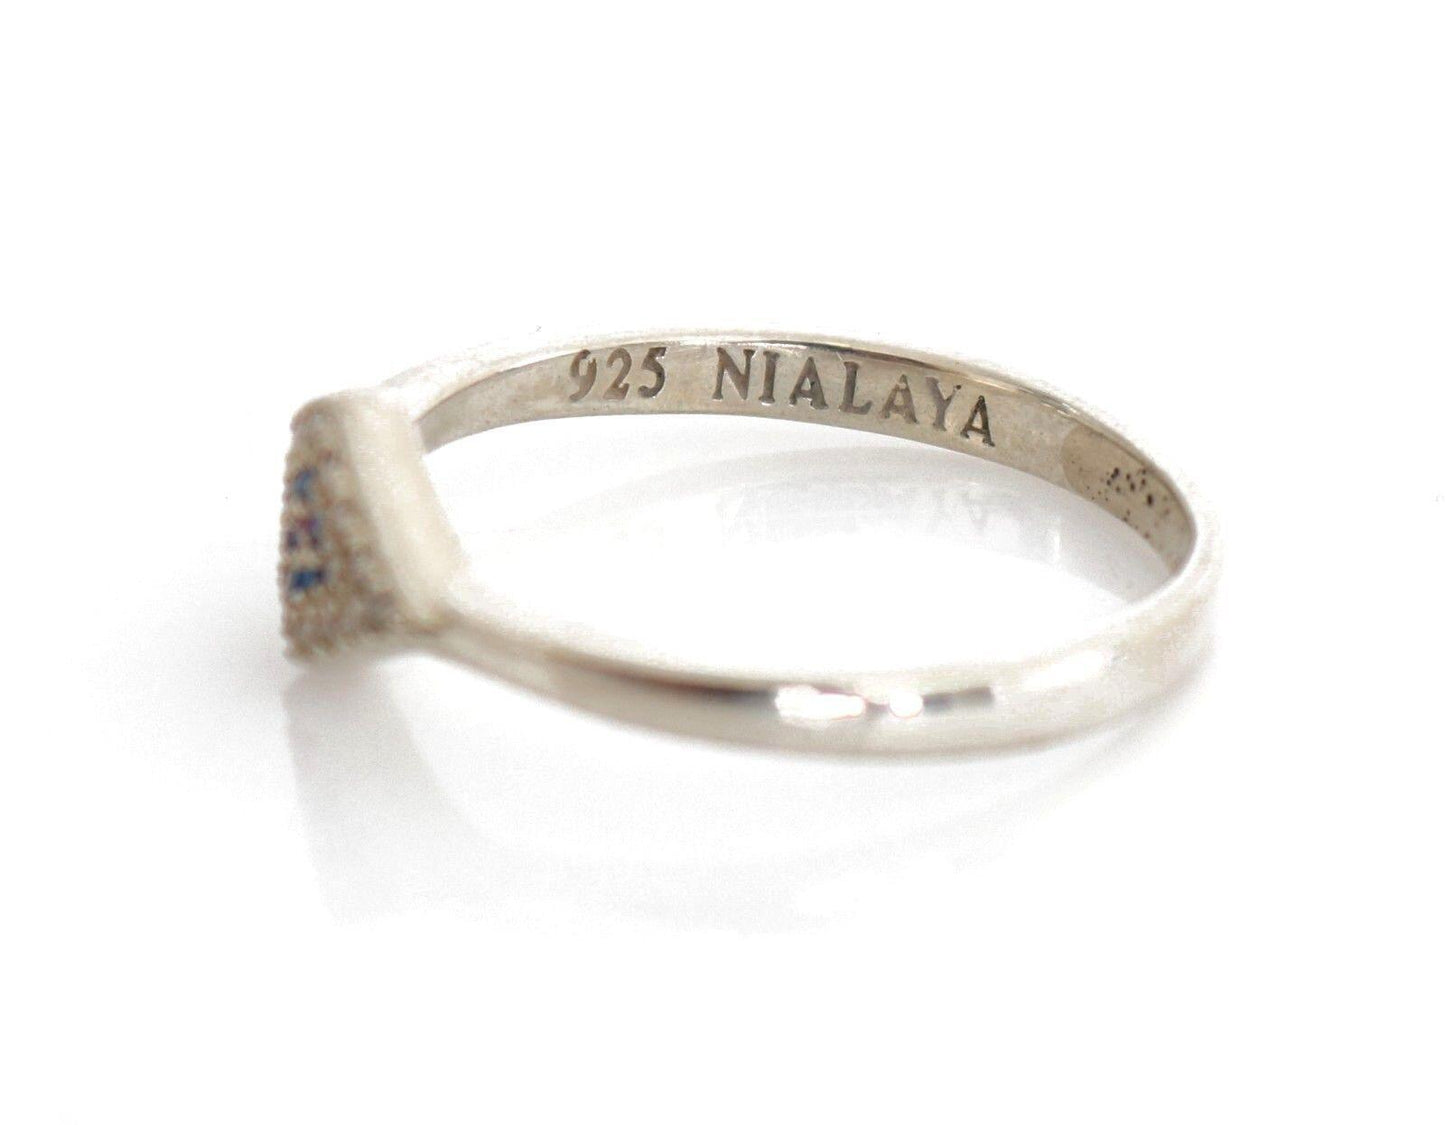 Blue Red CZ 925 Silver Womens Clear Ring - Designed by Nialaya Available to Buy at a Discounted Price on Moon Behind The Hill Online Designer Discount Store